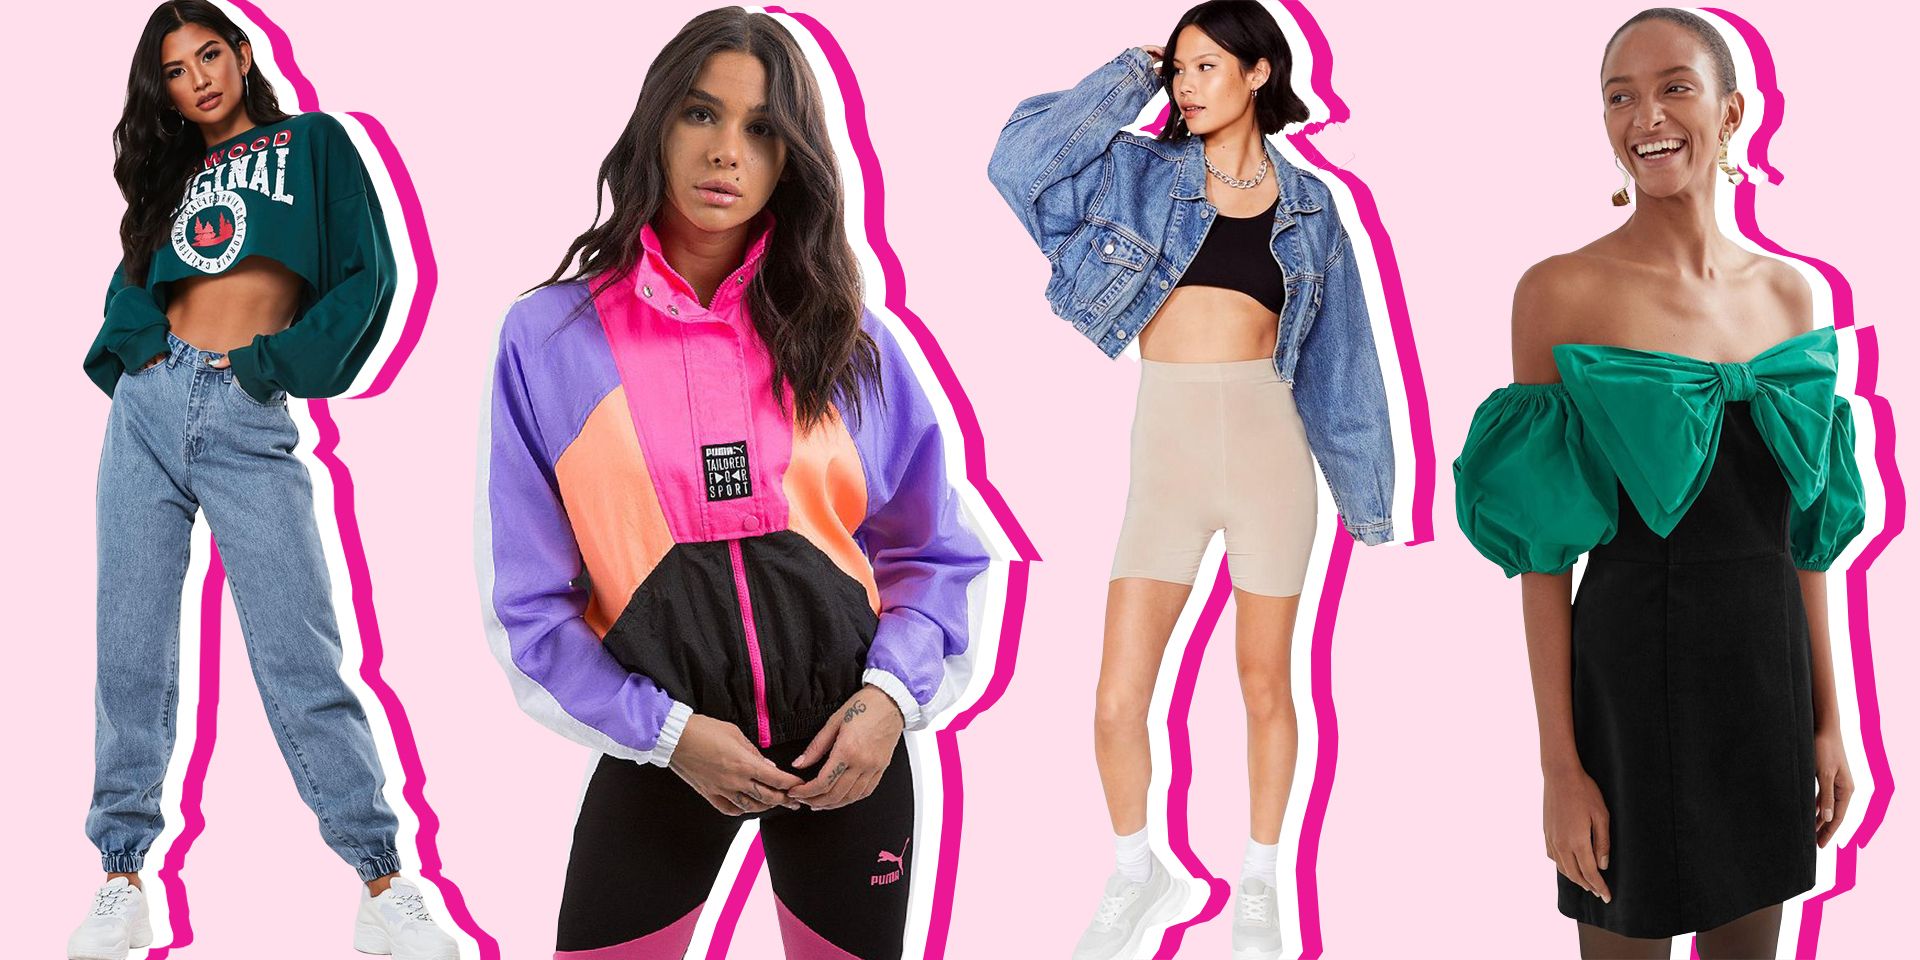 13 Cute '80s Outfits - Best '80s Fashion Trends